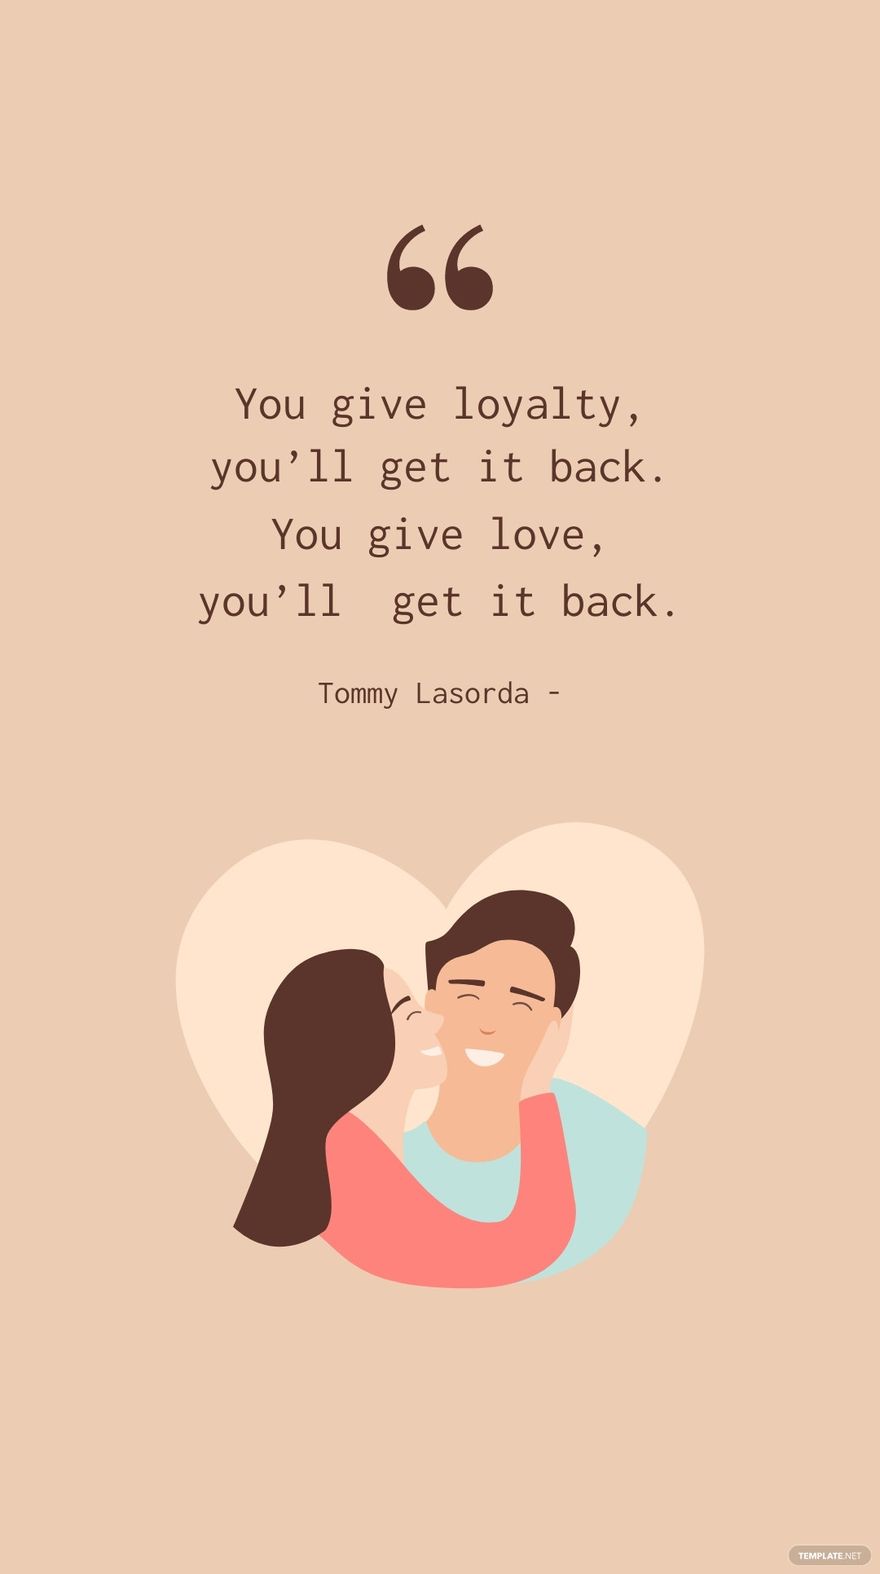 Tommy Lasorda - You give loyalty, you’ll get it back. You give love, you’ll  get it back.